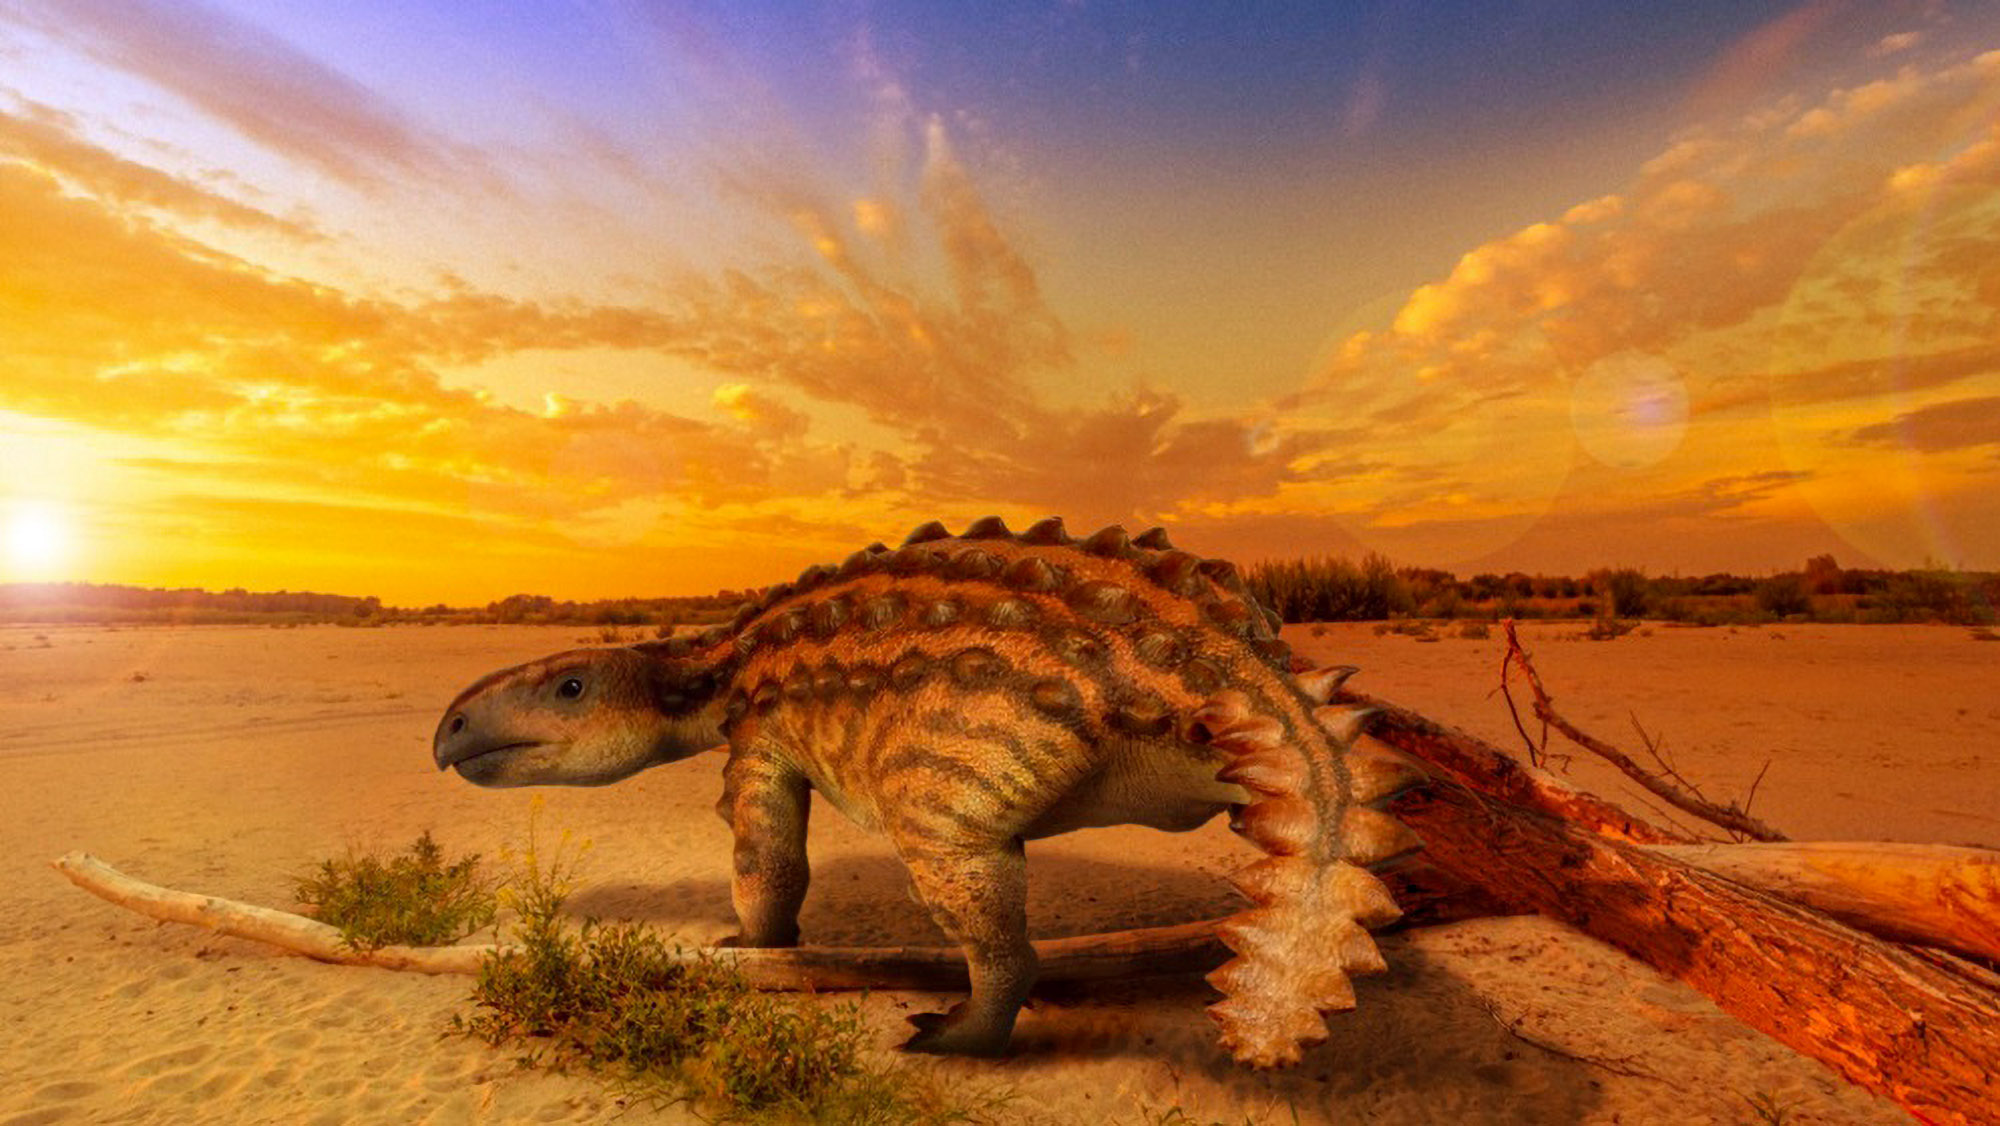 Dino-Sword: New Species Of Dinosaur With Vicious Sting In The Tail